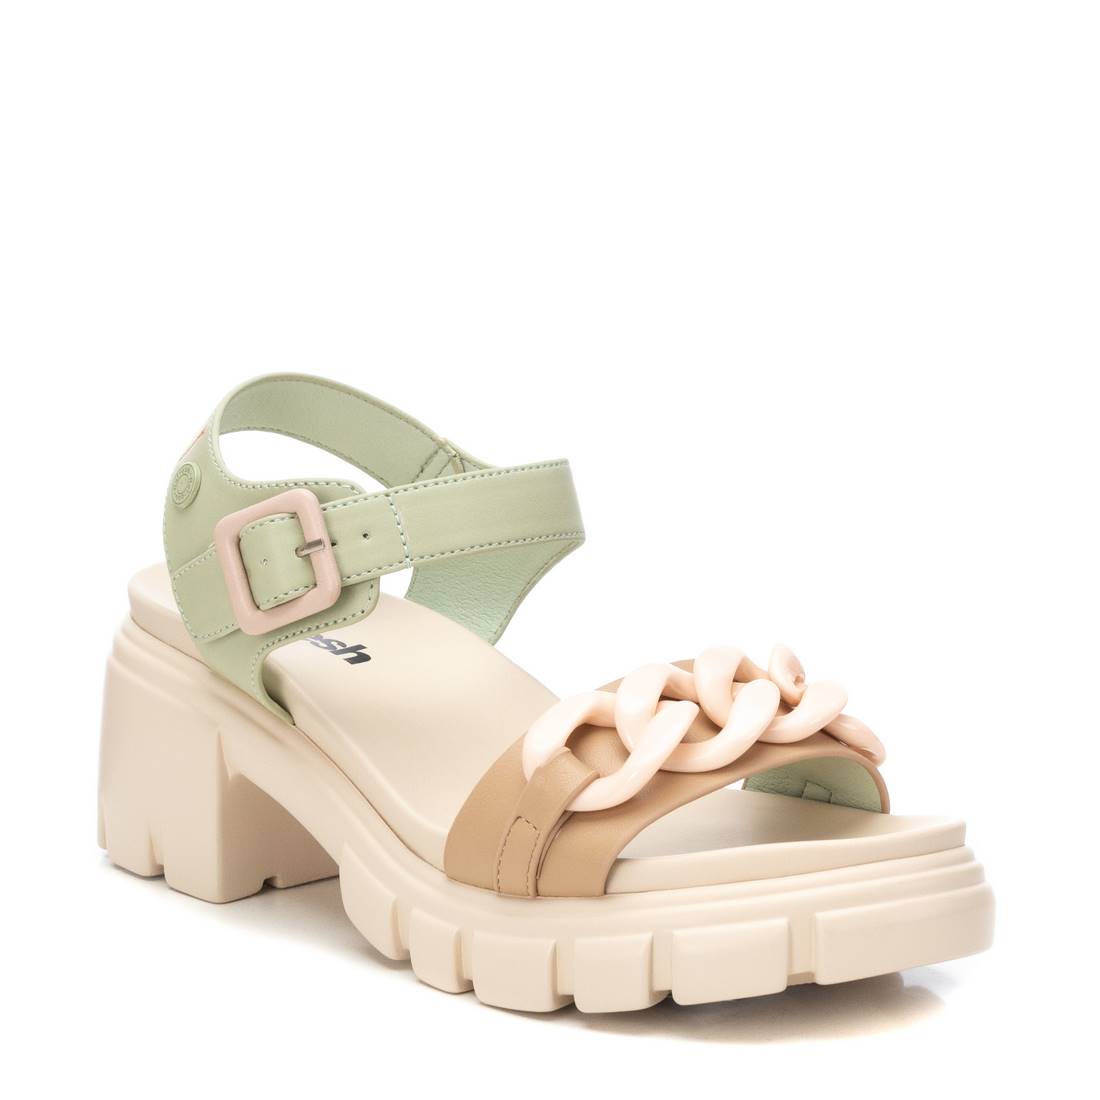 Refresh - Sandal with Buckle Detail in Beige 171937